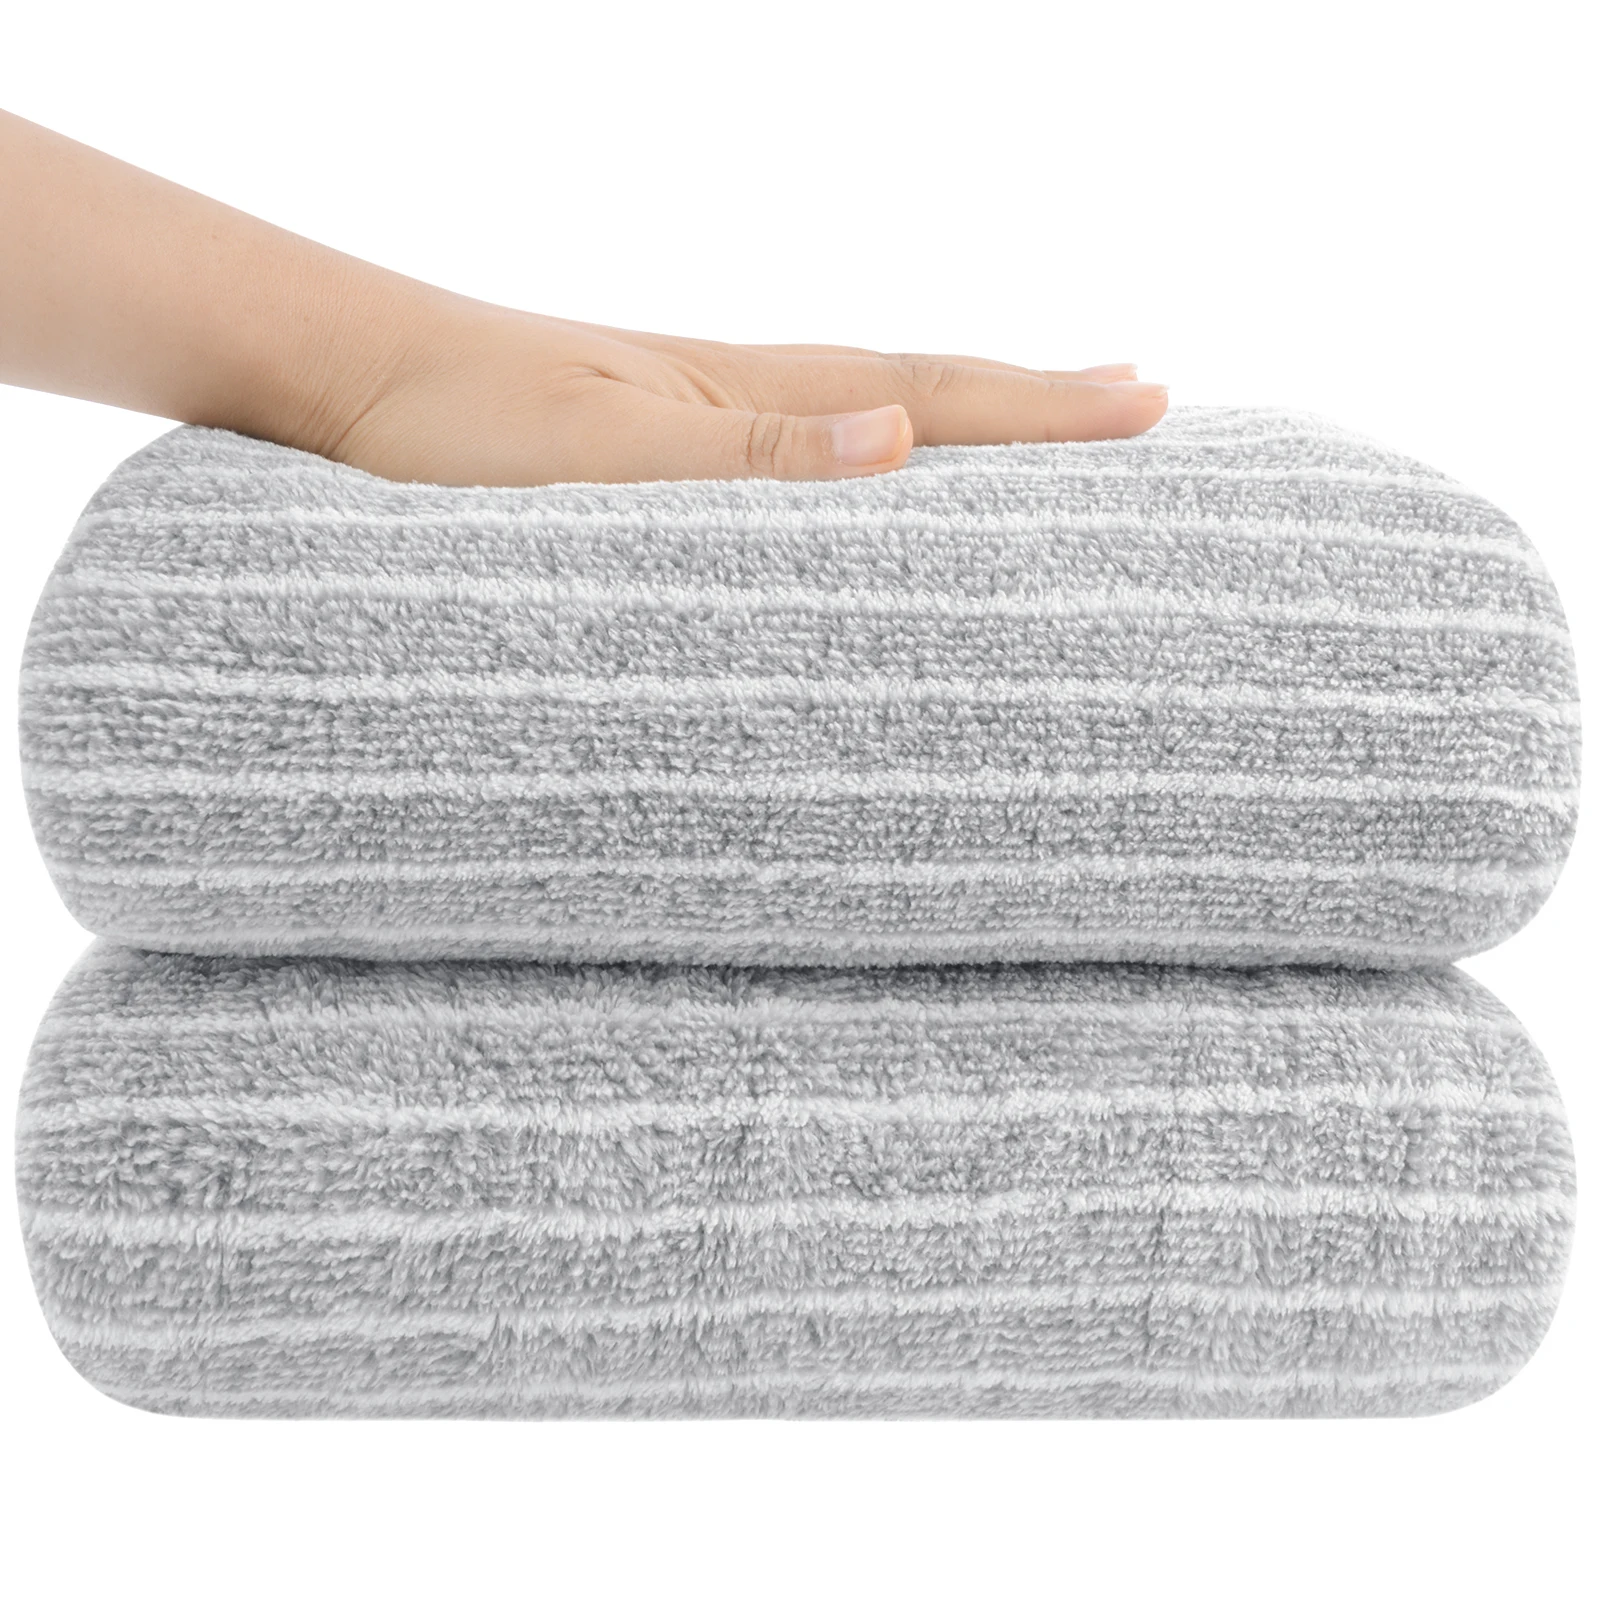  KinHwa Microfiber Hand Towels for Bathroom Soft and Absorbent  Face Towels for Bath, Spa, Gym 16inch x 30inch 2 Pack Gray : Home & Kitchen